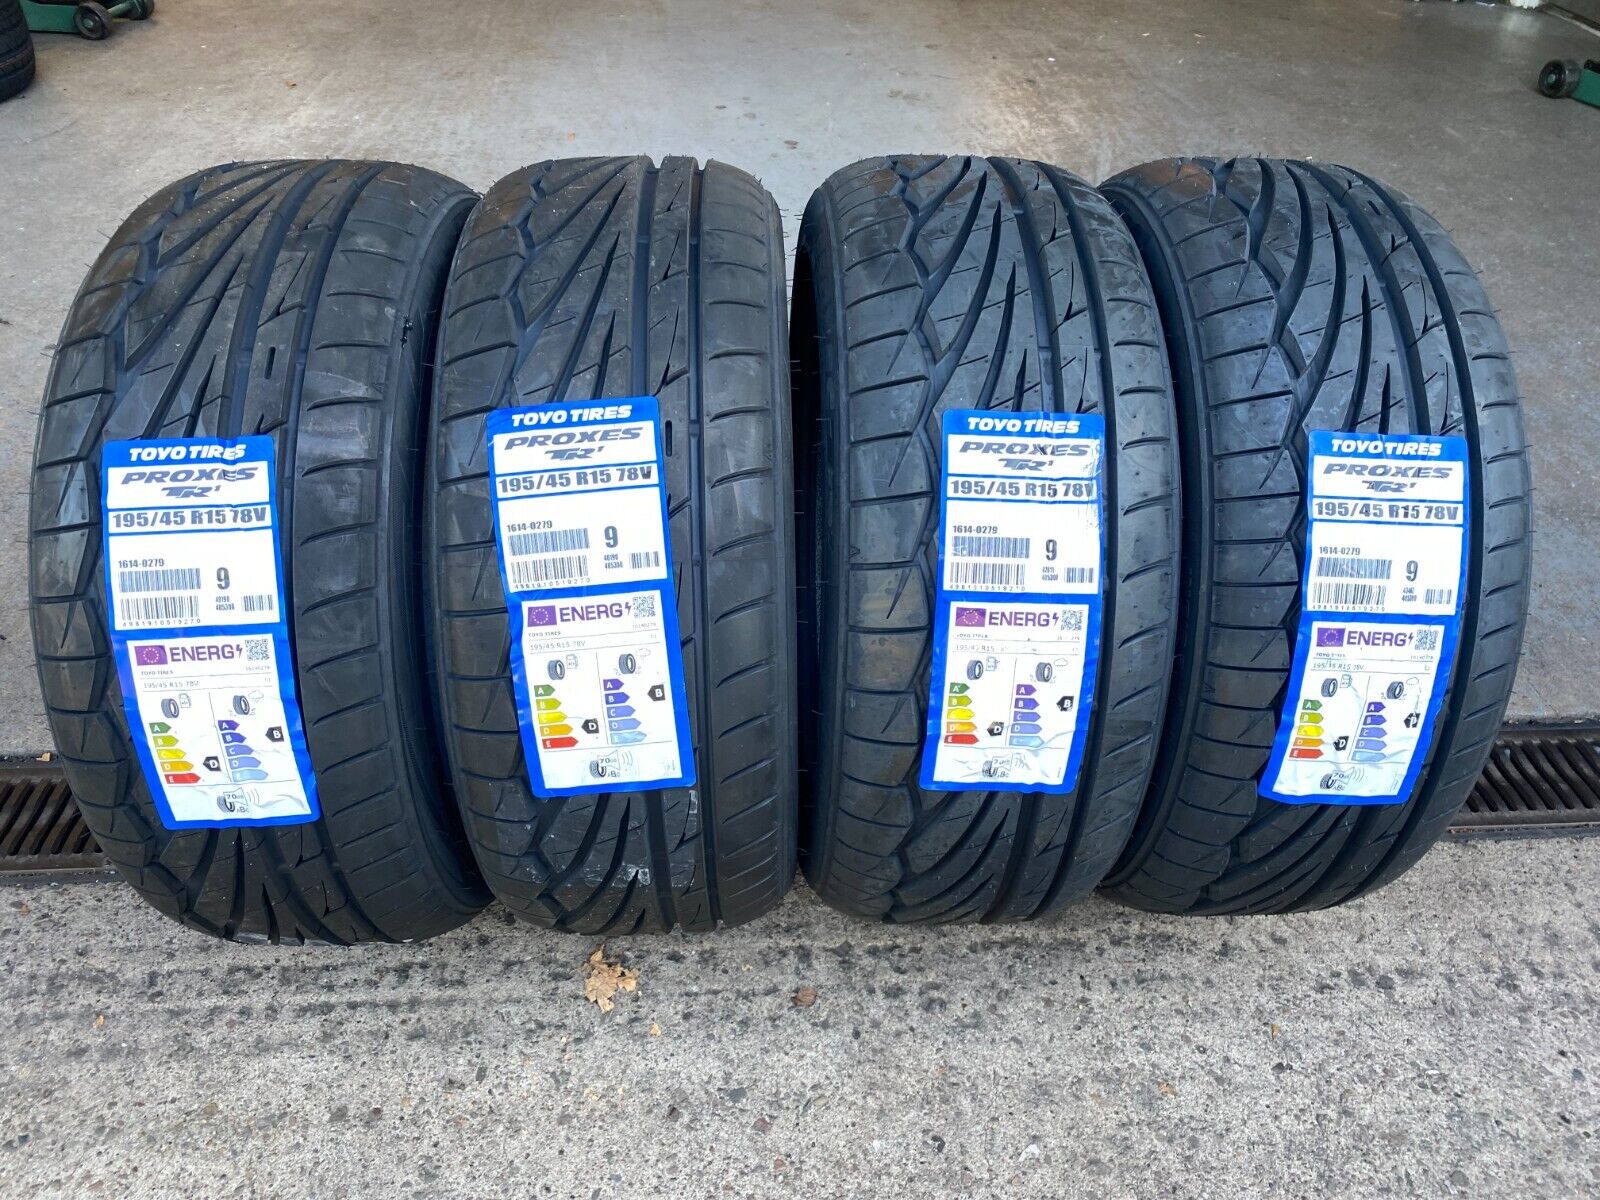 45 TOP ROAD 78V eBay PROXES TYRES X4 QUALITY 15 195/45R15 195 TOYO DAY/ TRACK | TR-1